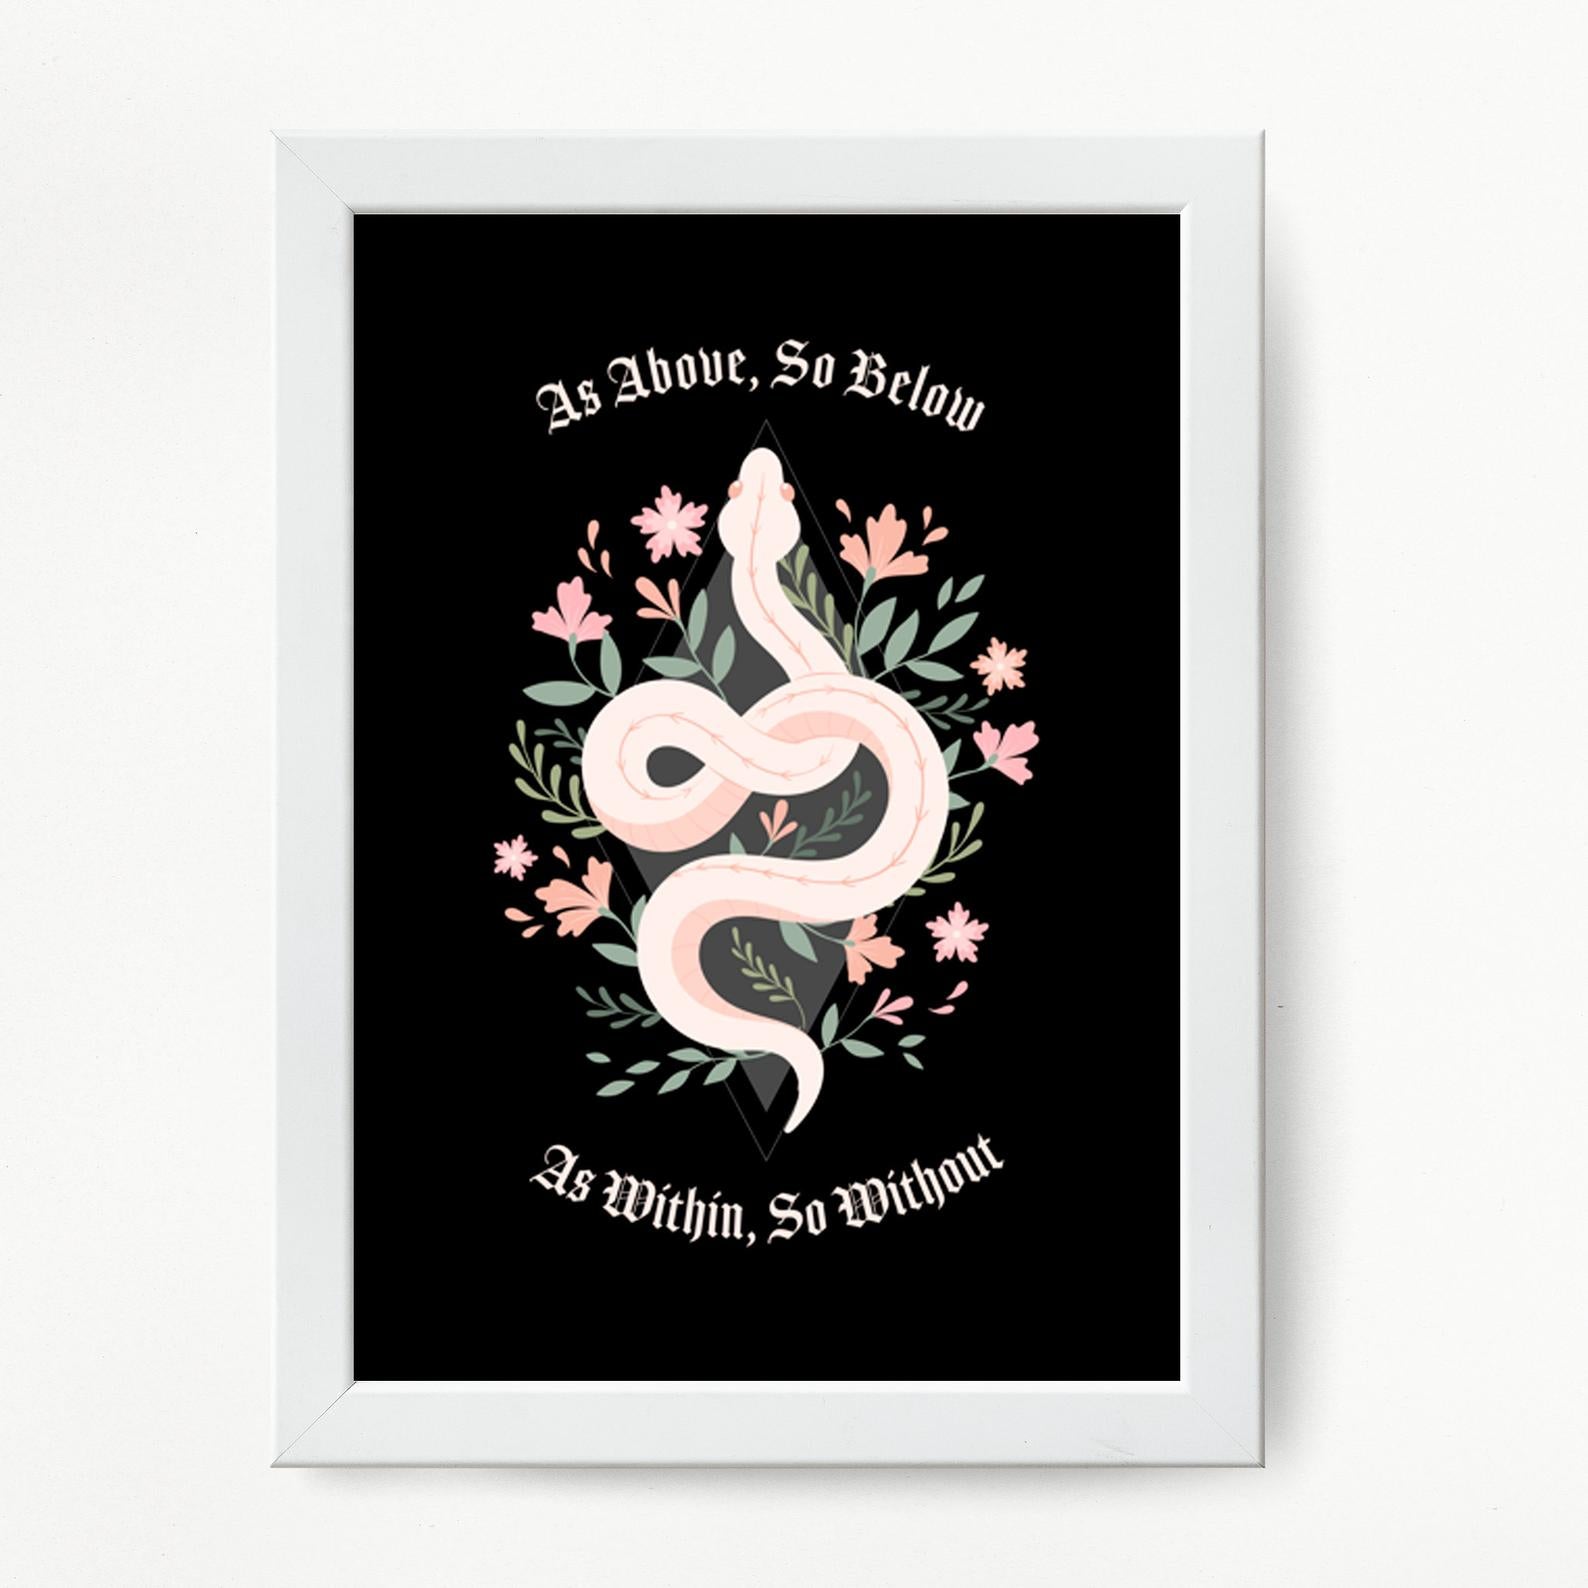 Witchy Snake Poster